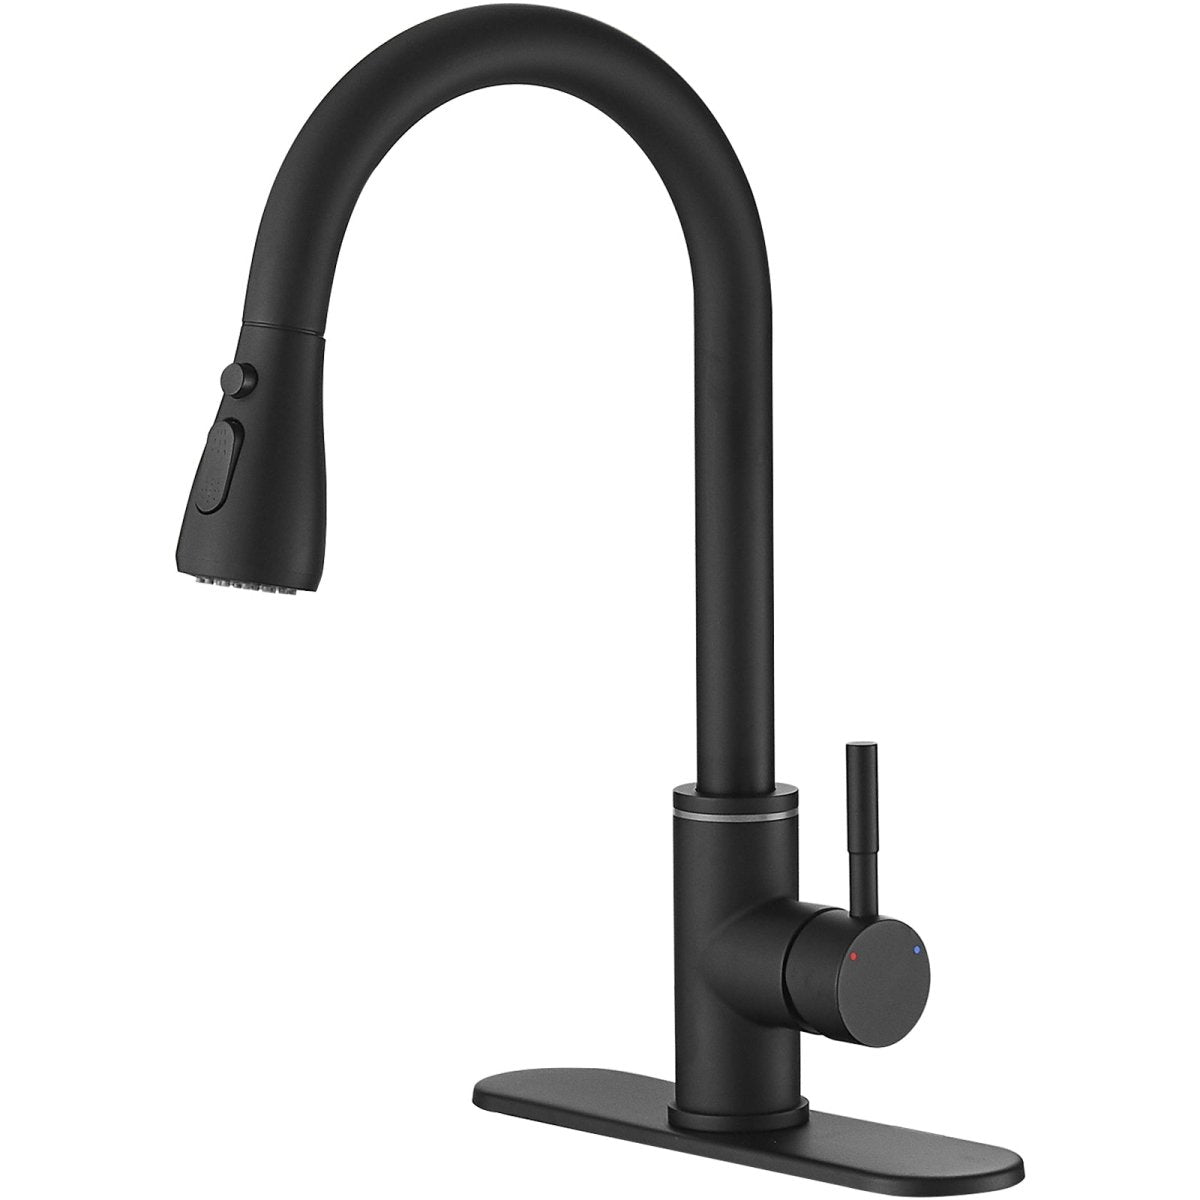 Single Handle Pull-Out Sprayer Kitchen Faucet in Matte Black - buyfaucet.com